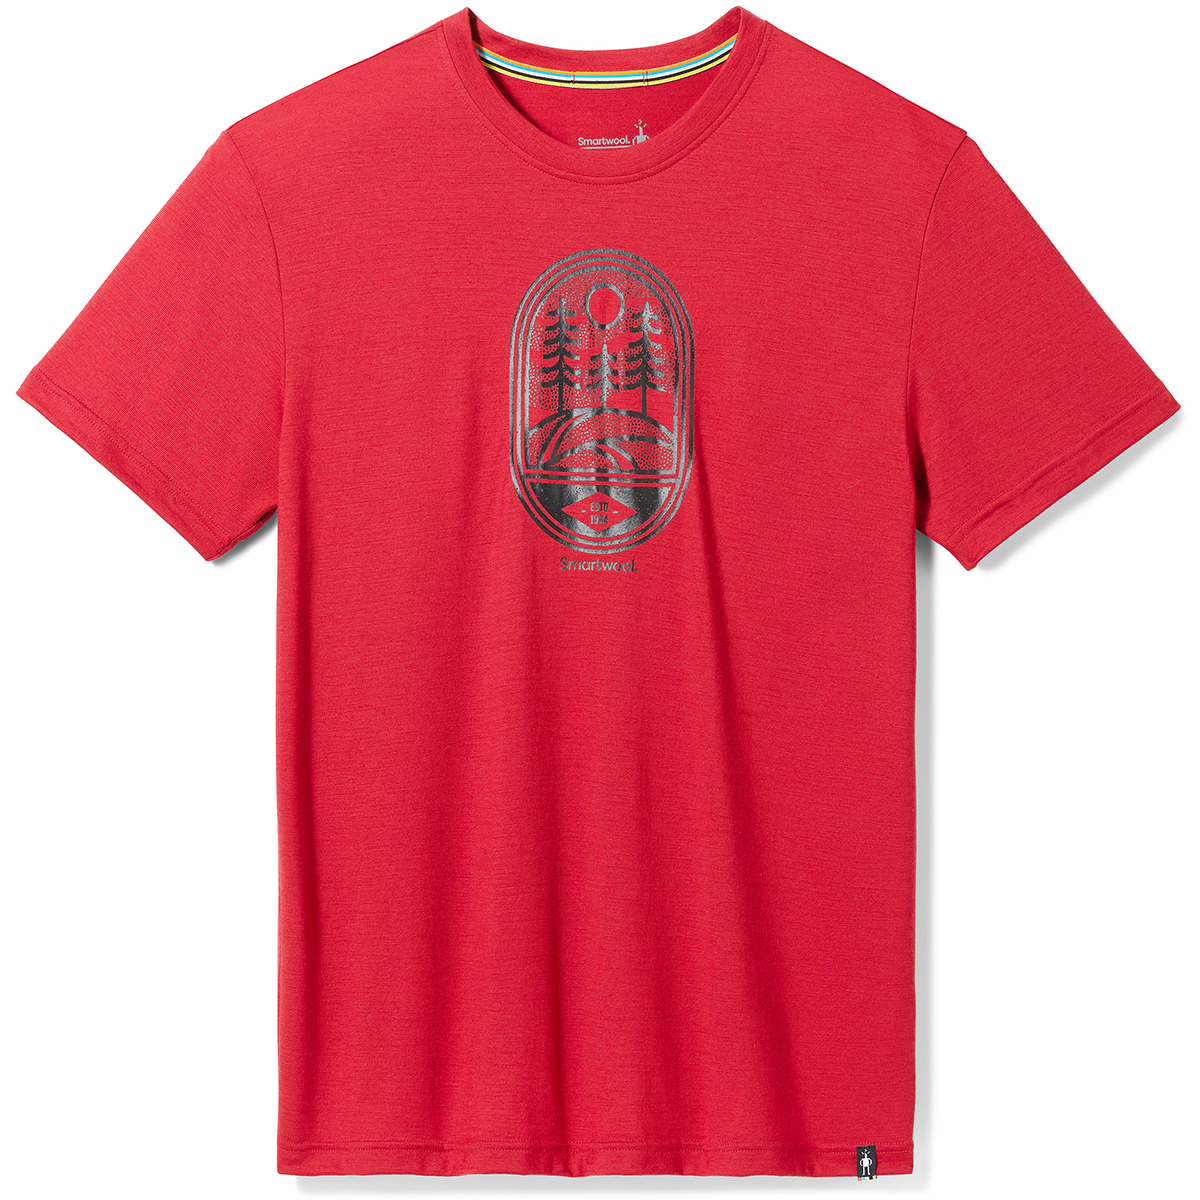 Smartwool Men's Mountain Trail Graphic Short-Sleeve Tee